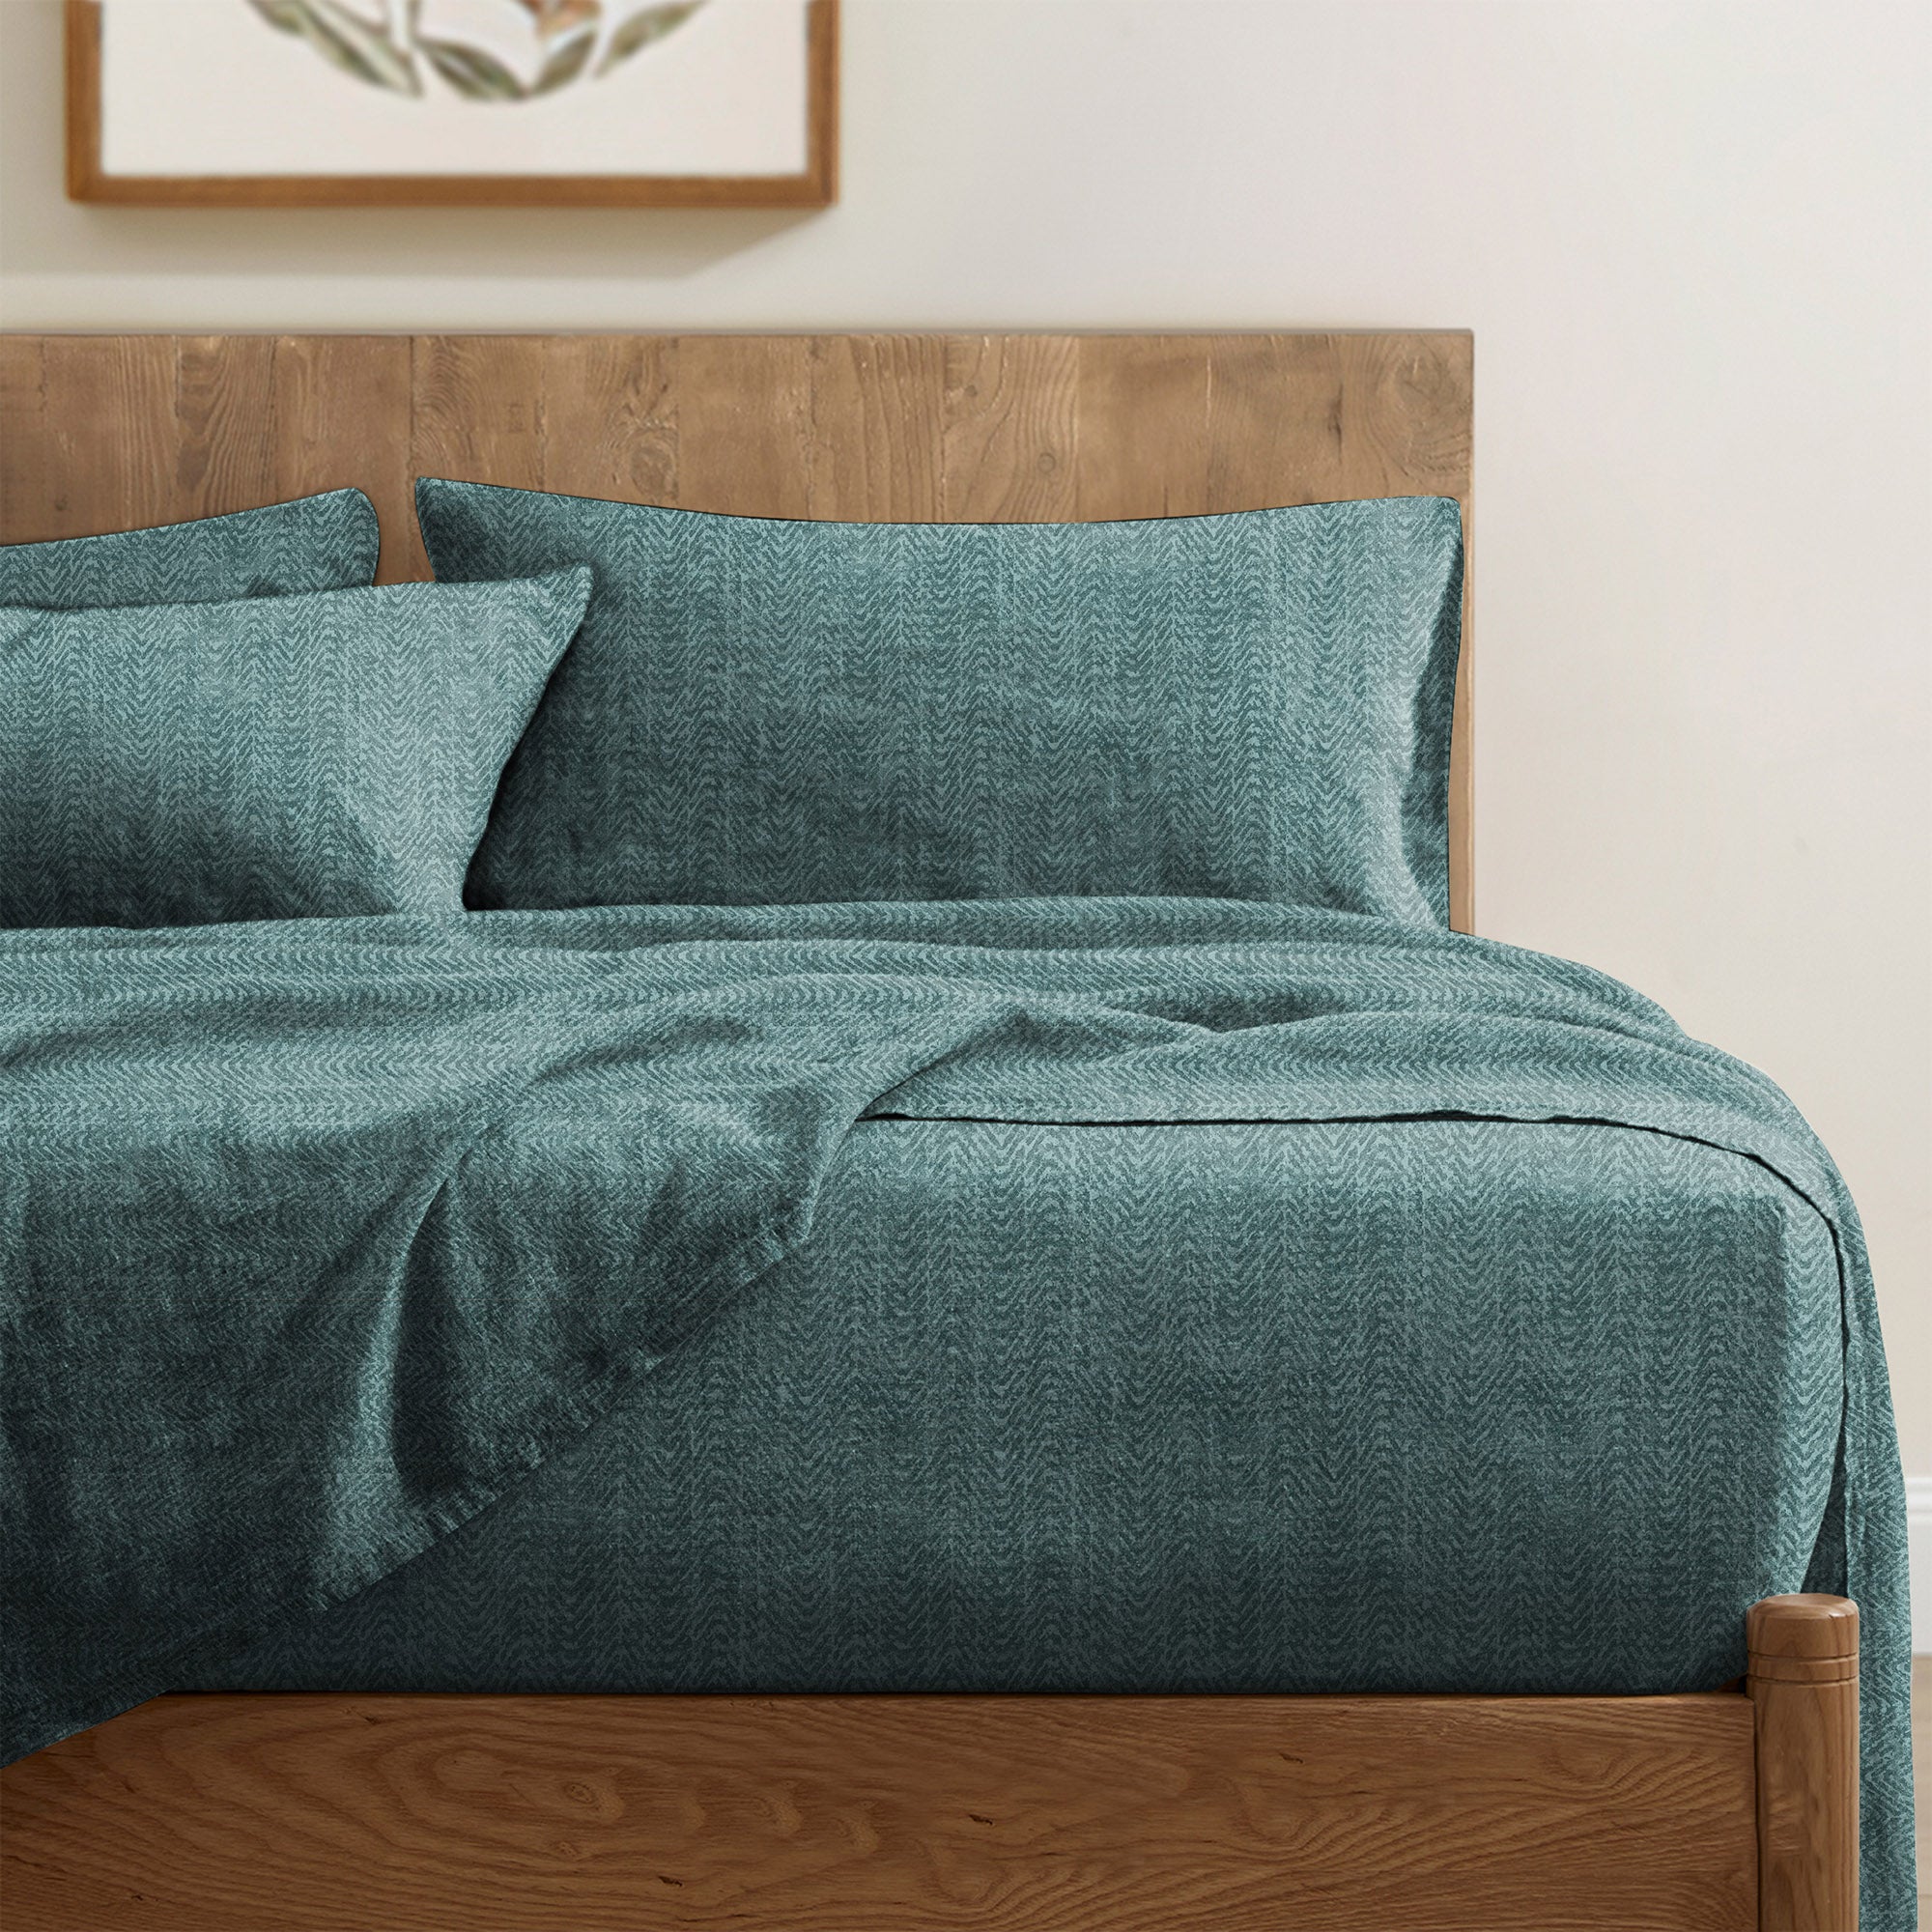 Casableu Microfiber Turin Teal Bedcover for Double Bed with 2 Pillow Covers King Size (104" X 90")